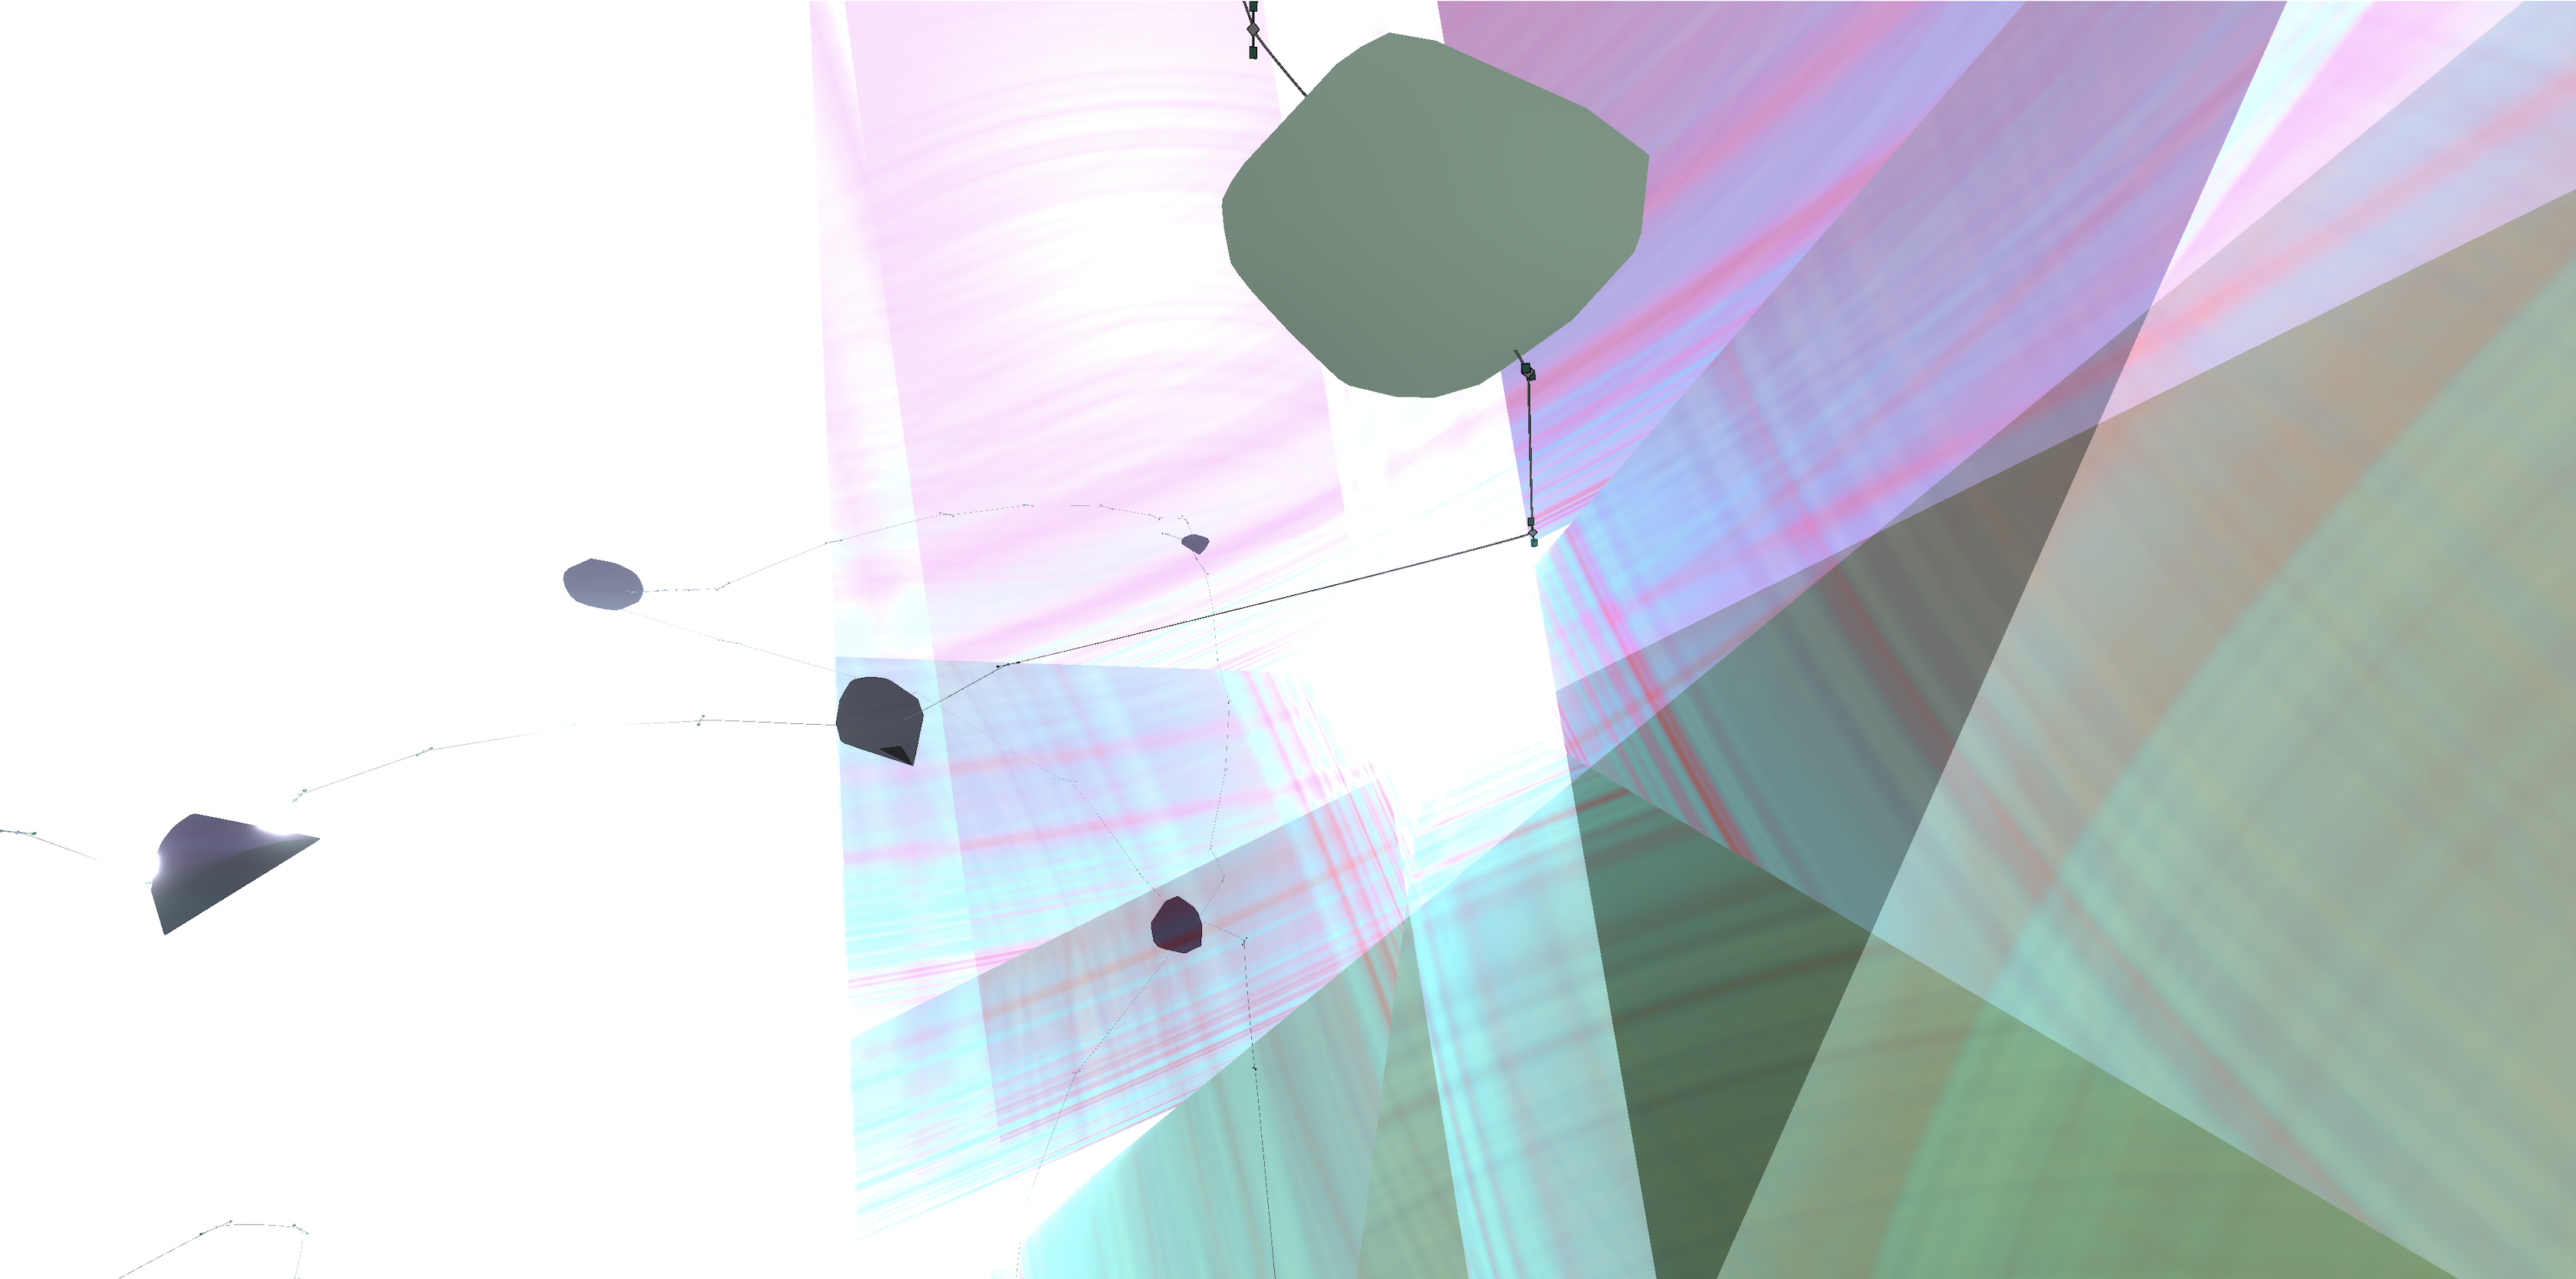 A digital image of a VR world created by artist Caroline Coolidge showing abstract bright glasslike sheets. They are colored white, gray, pink, green, and blue, with gray bolder-like objects interspersed, all on top of a distant dark background.